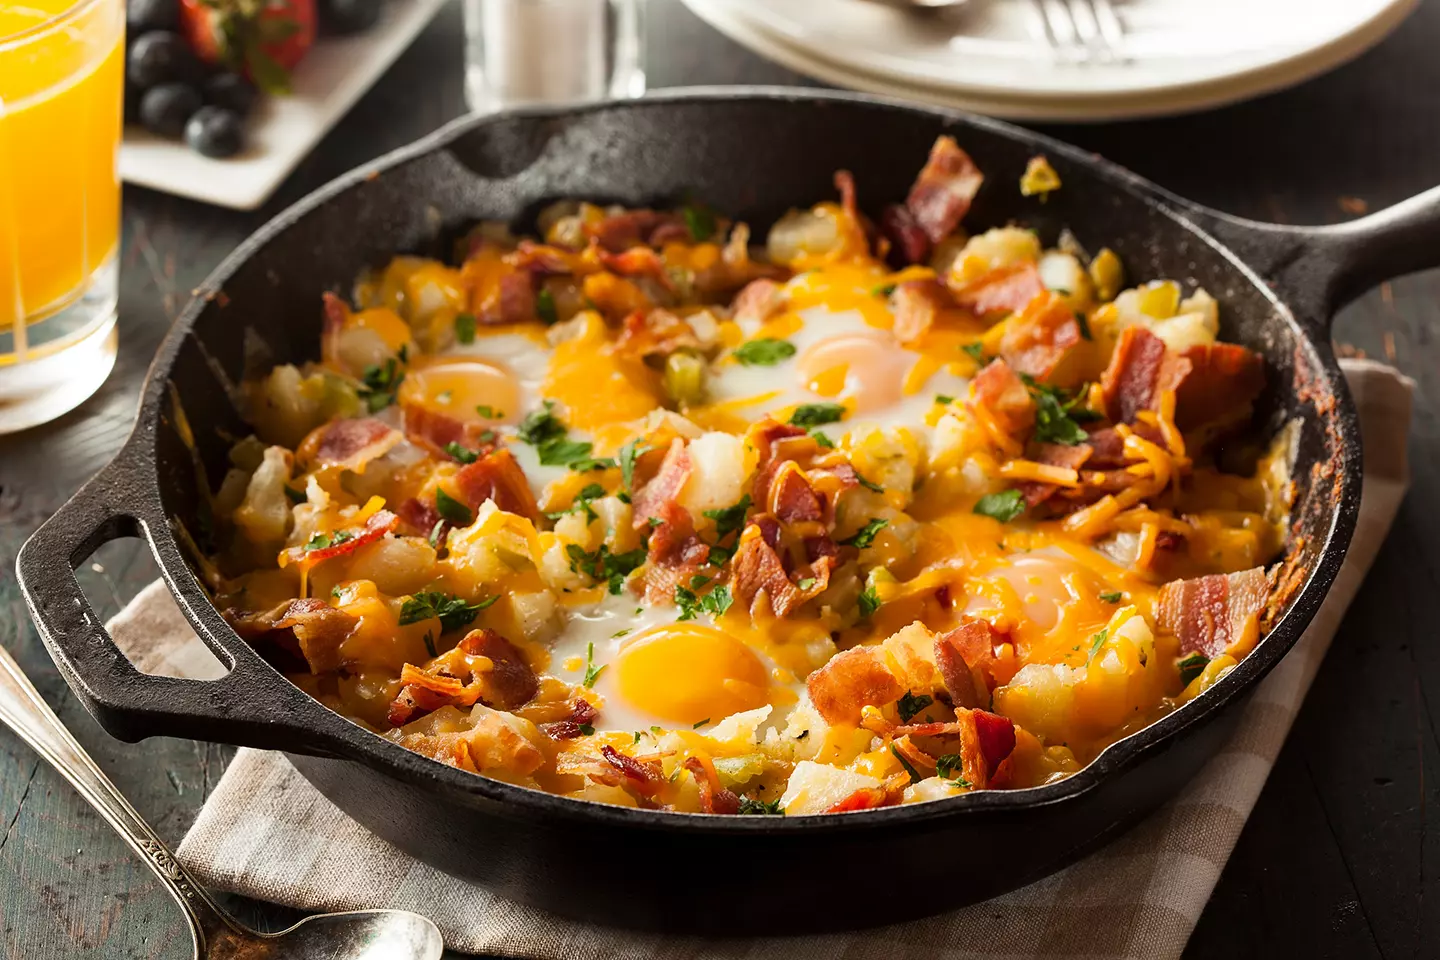 Food cooking in a cast-iron skillet